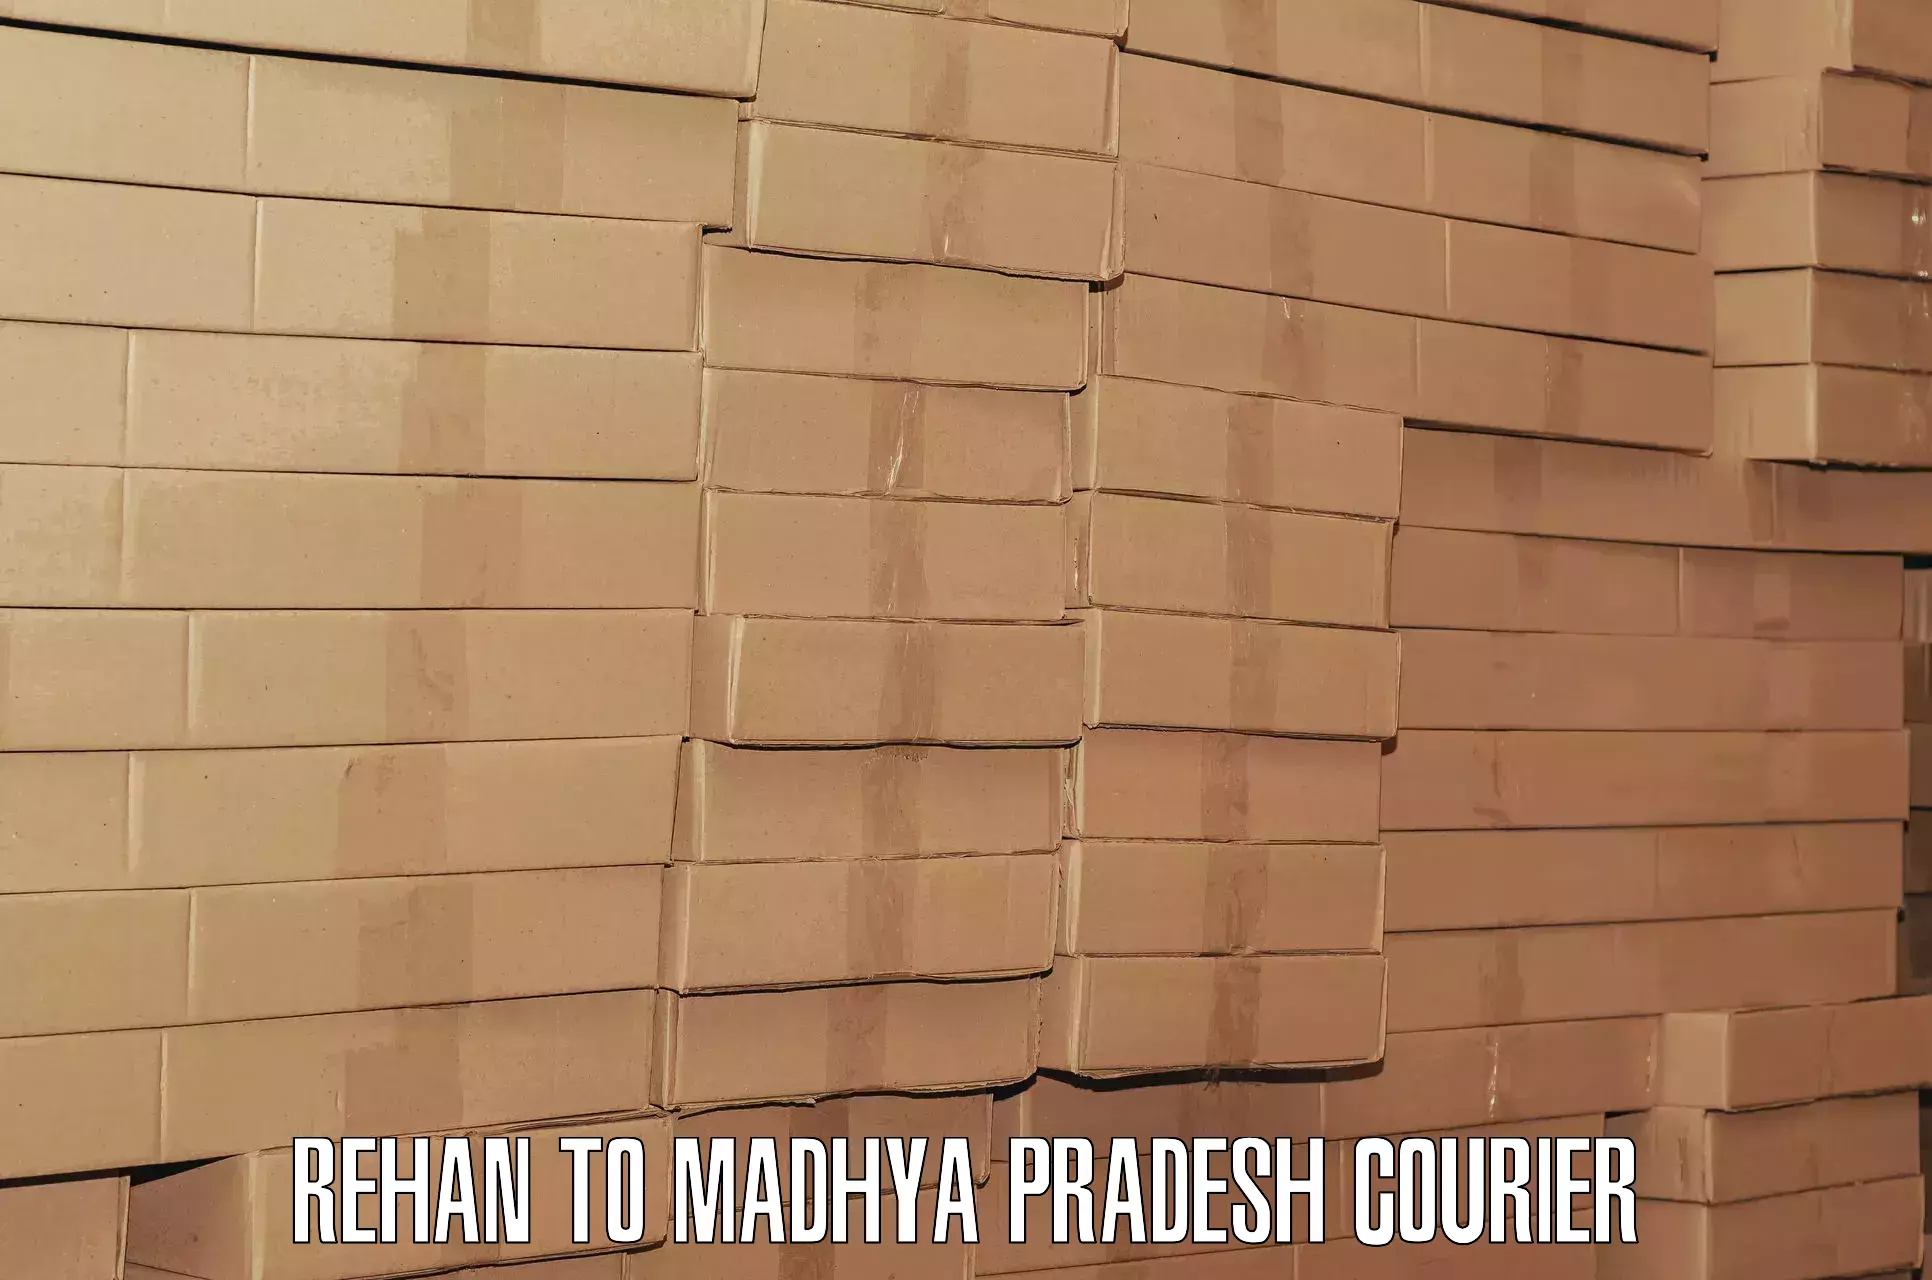 Baggage delivery technology Rehan to Madhya Pradesh